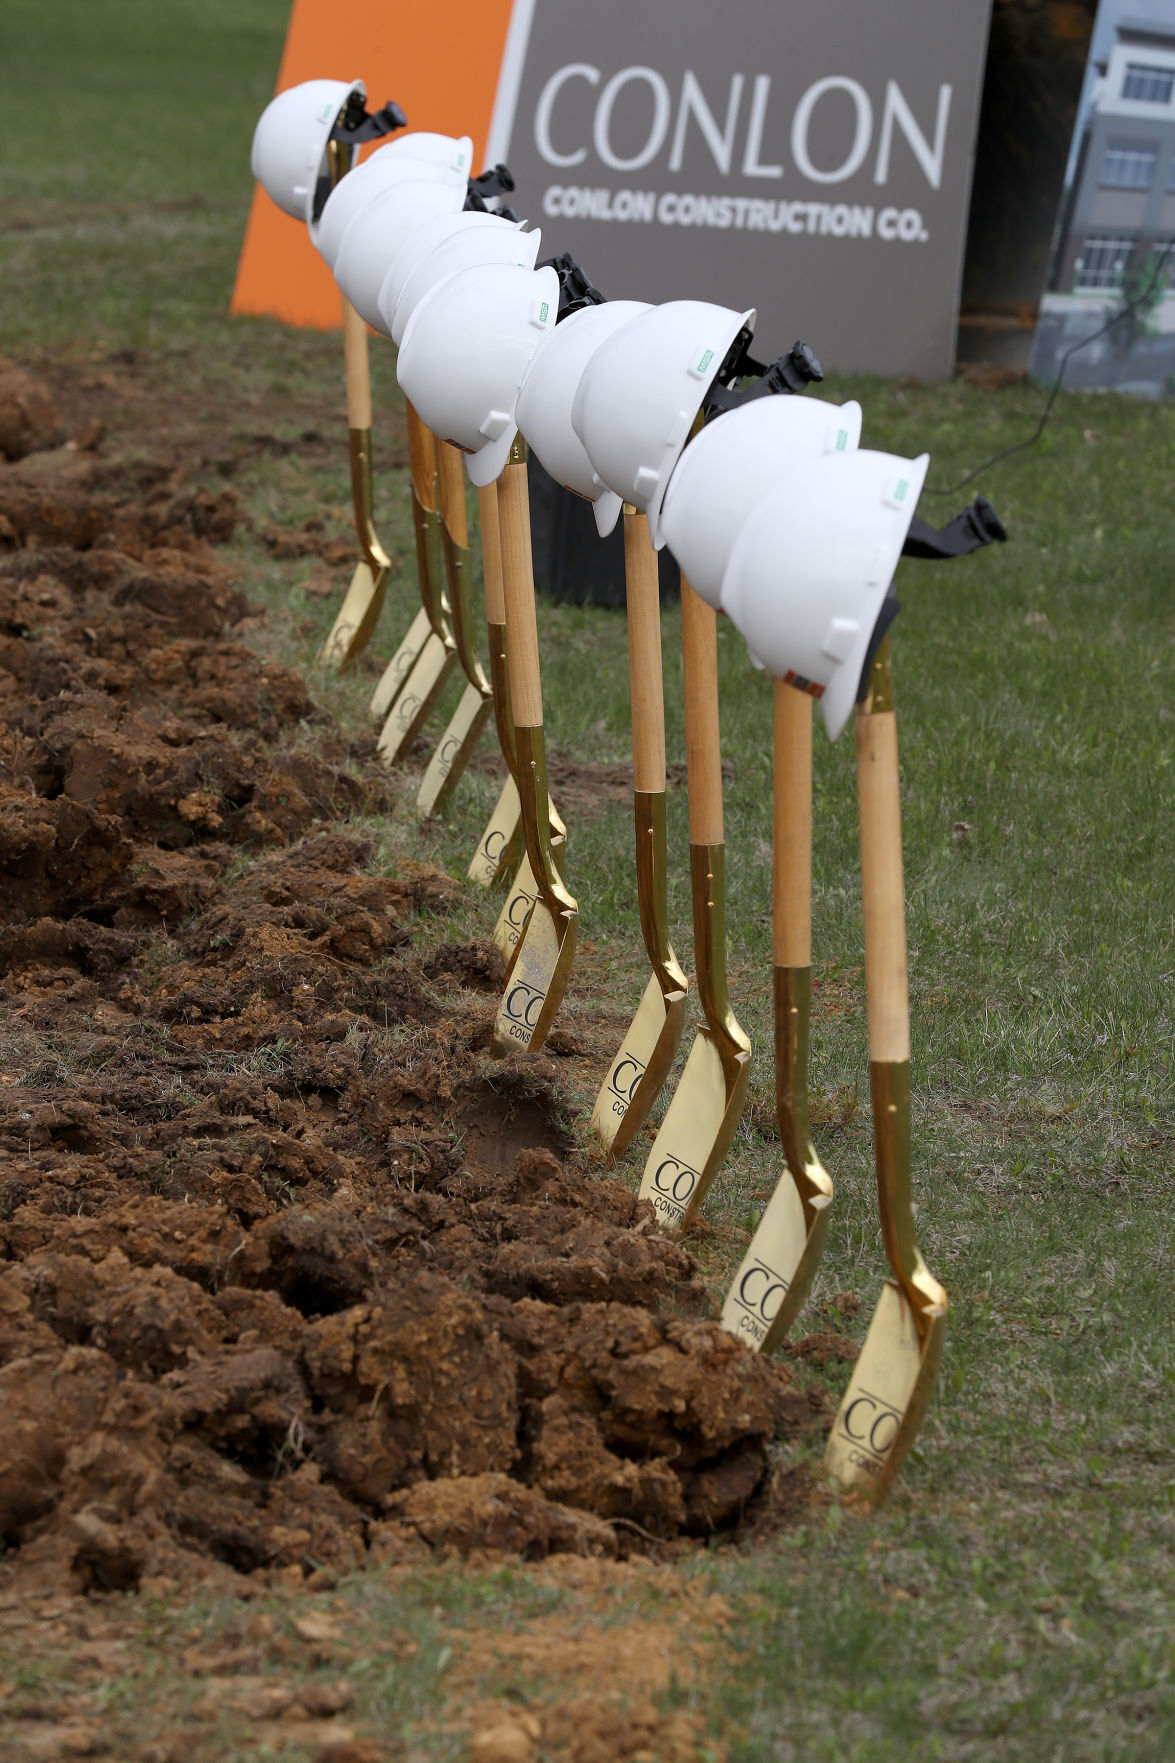 Golden shovels stand waiting for the groundbreaking for the new Grand River Medical building on Westmark Drive in Dubuque on Thursday, April 15, 2021. PHOTO CREDIT: Stephen Gassman